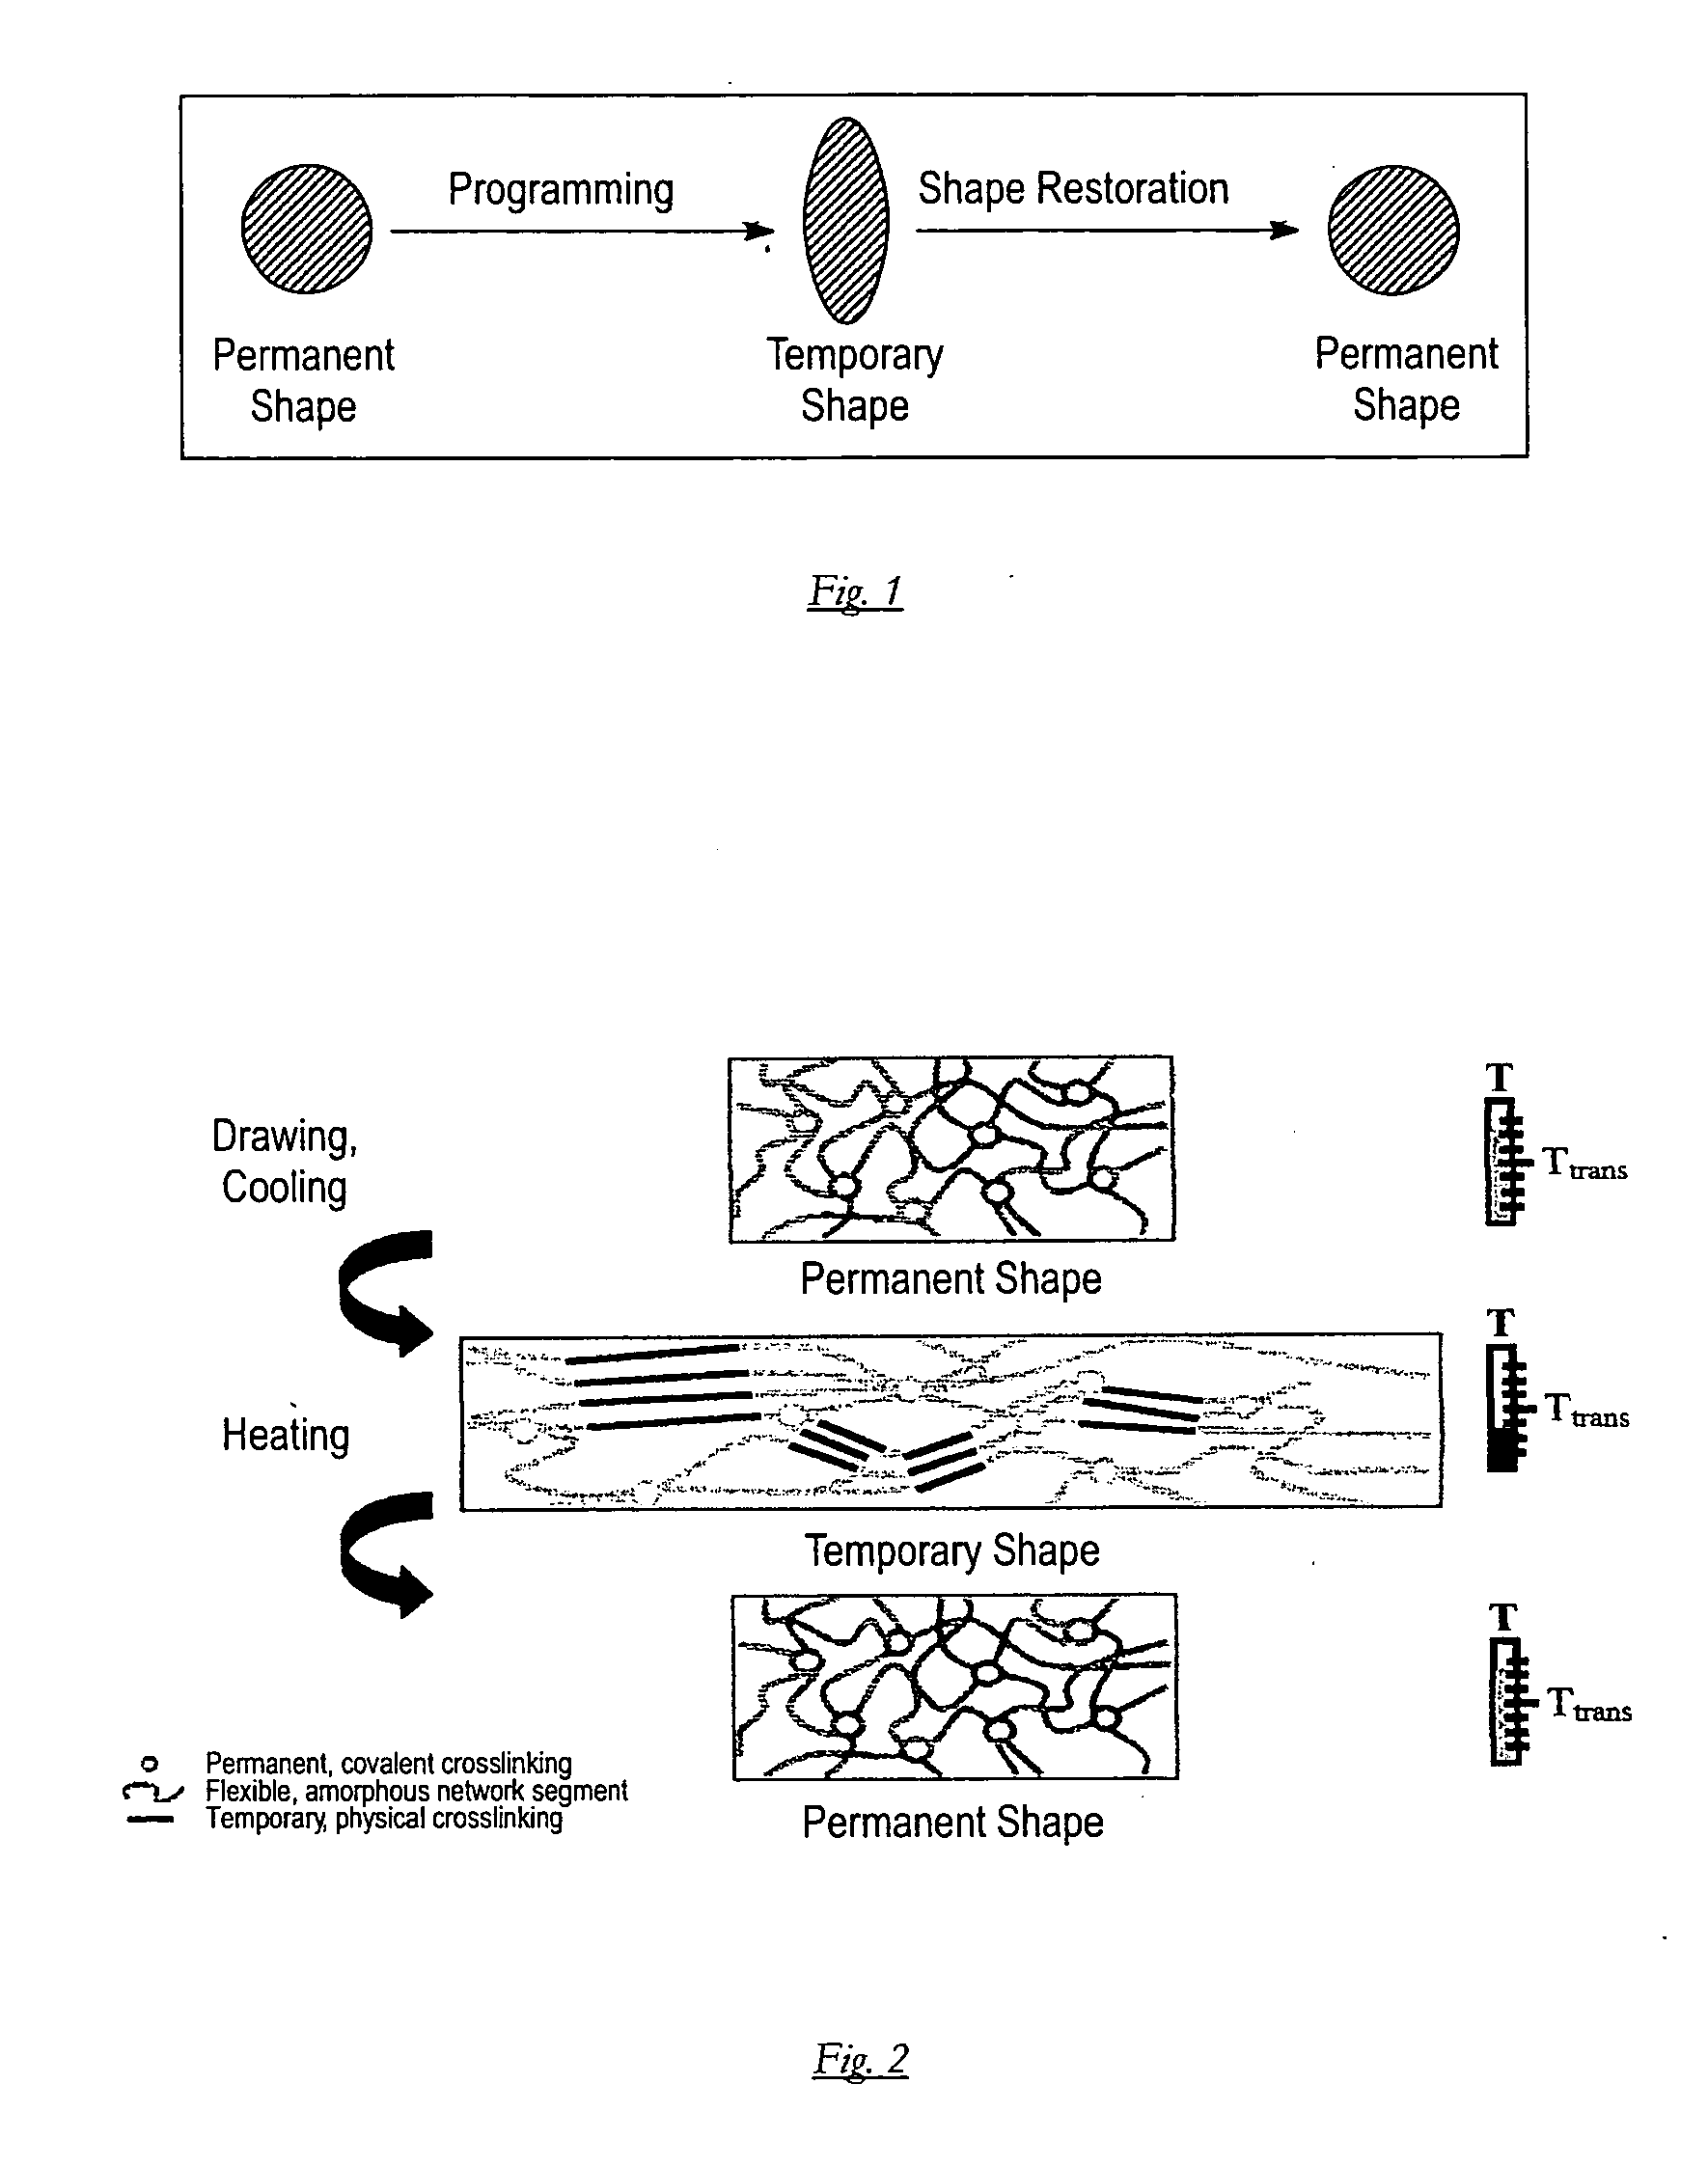 Self-expanding medical occlusion device